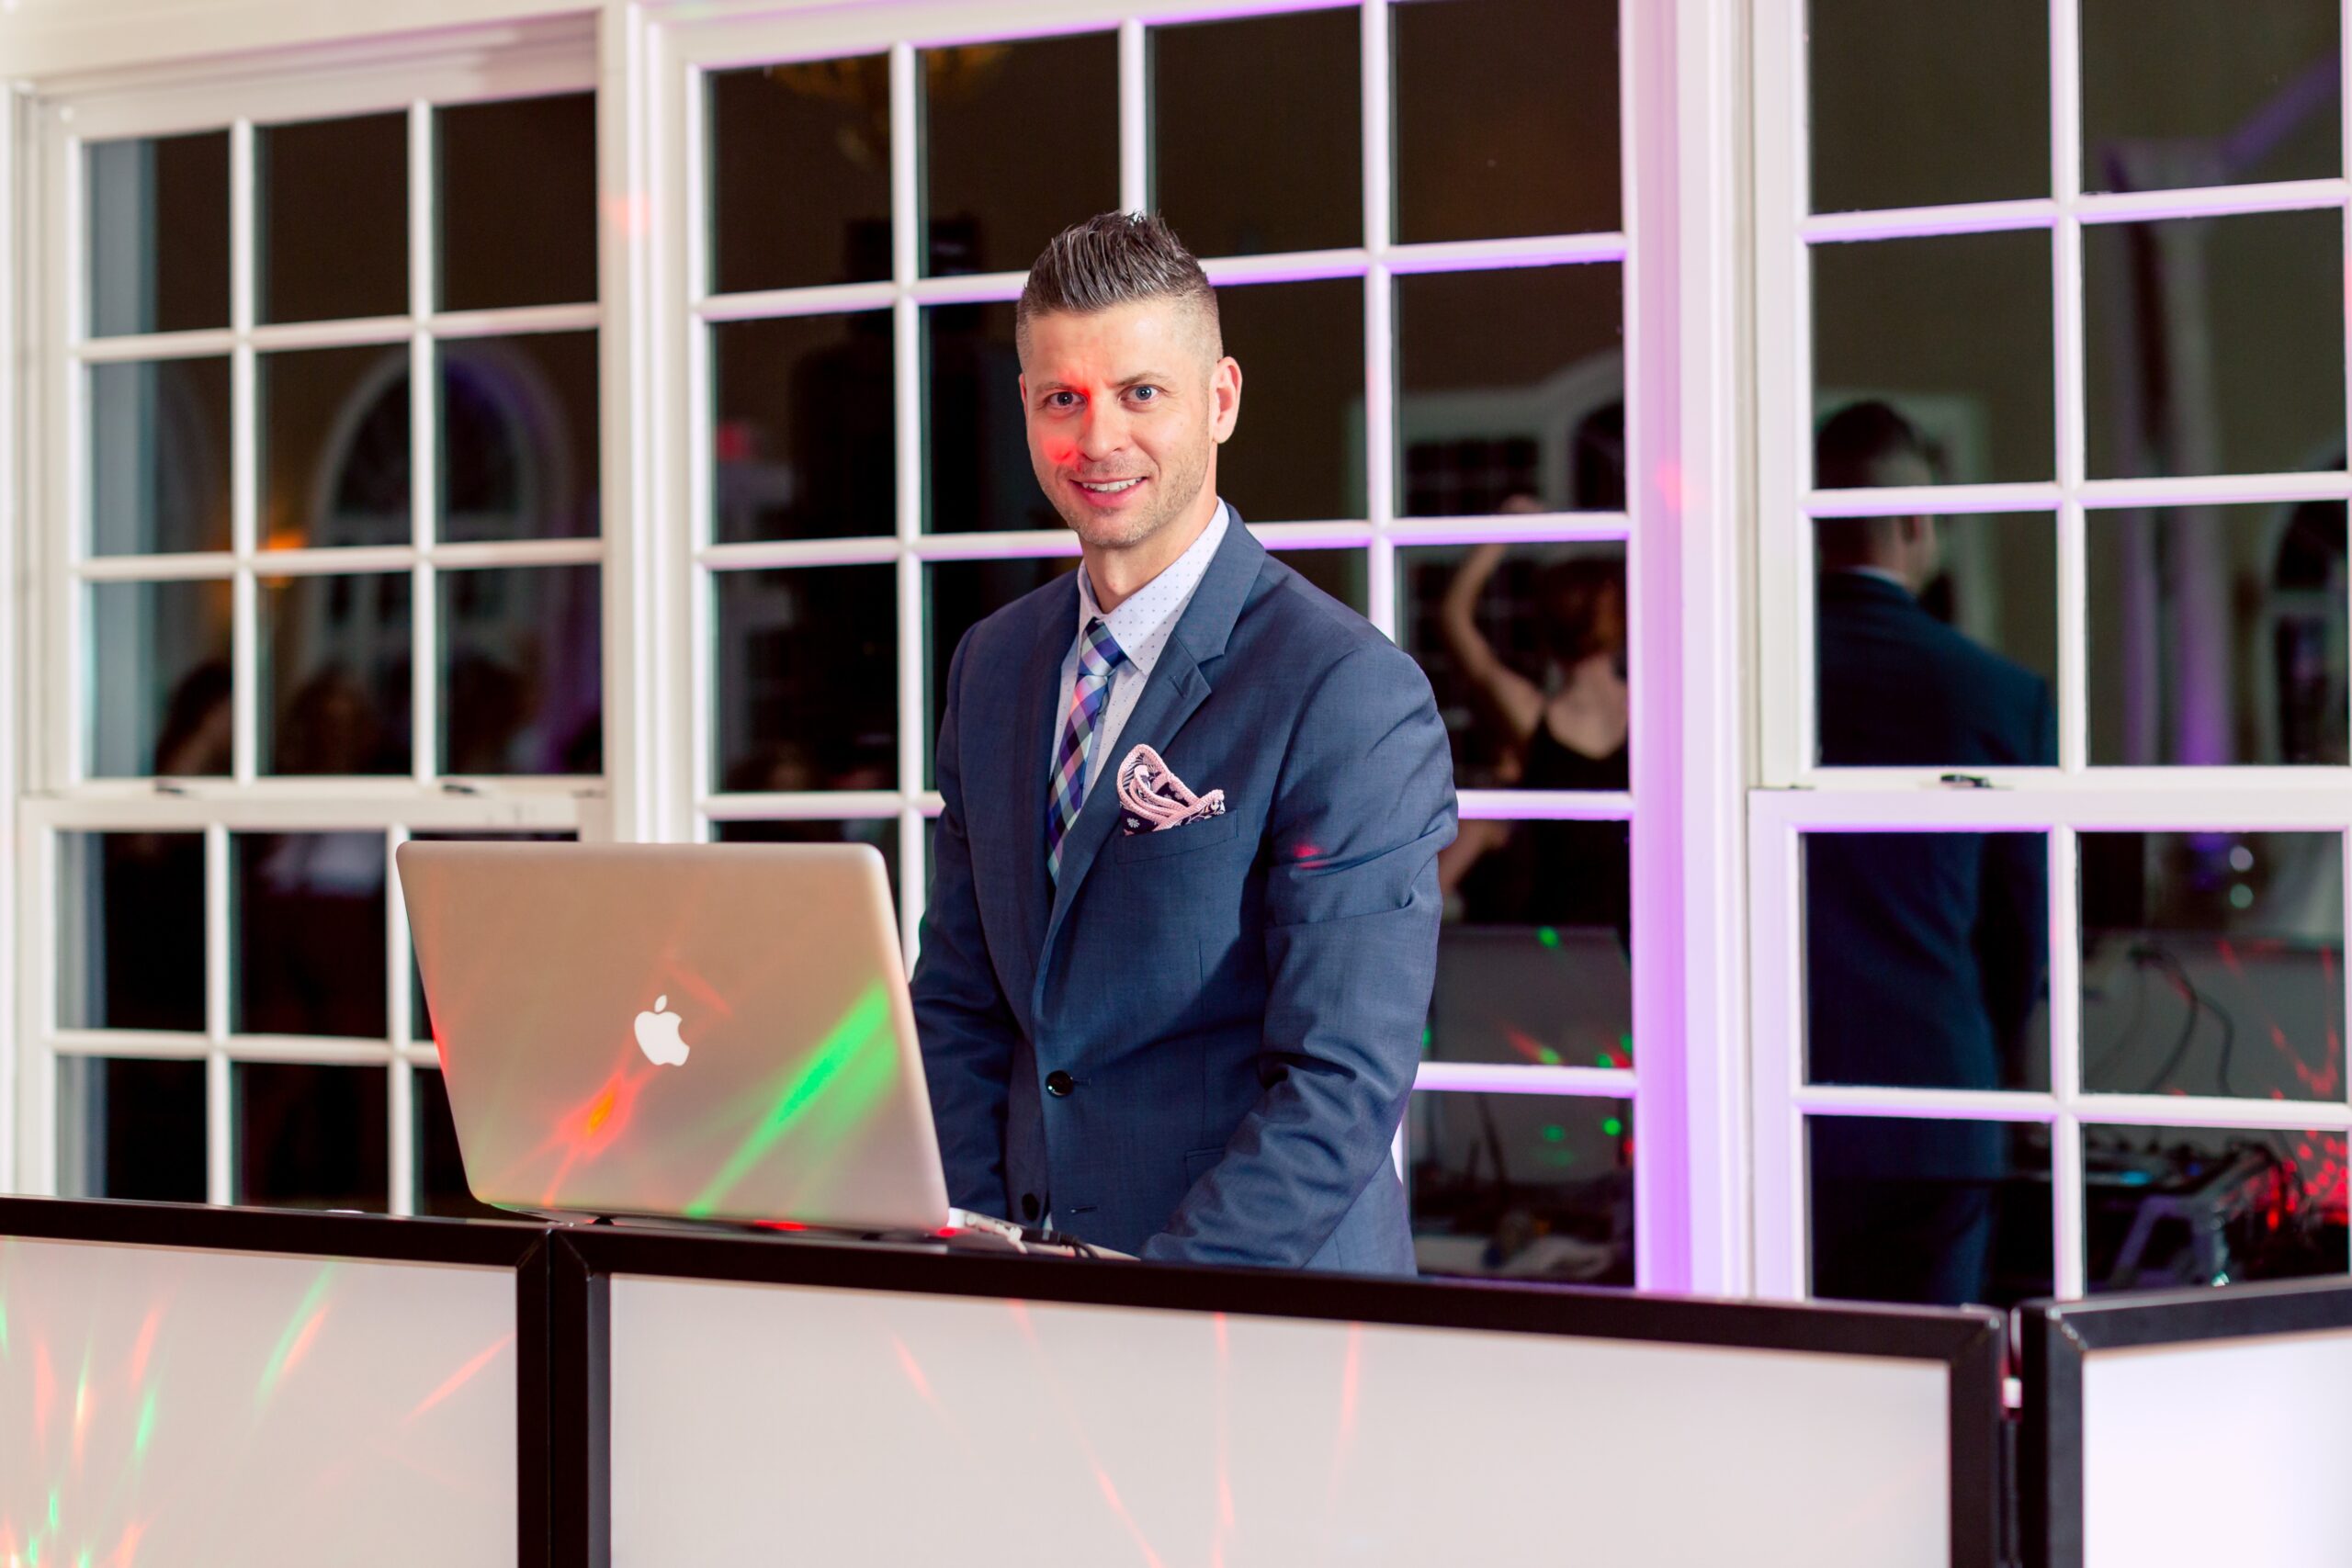 A man in a suit and tie standing at the front of a laptop.